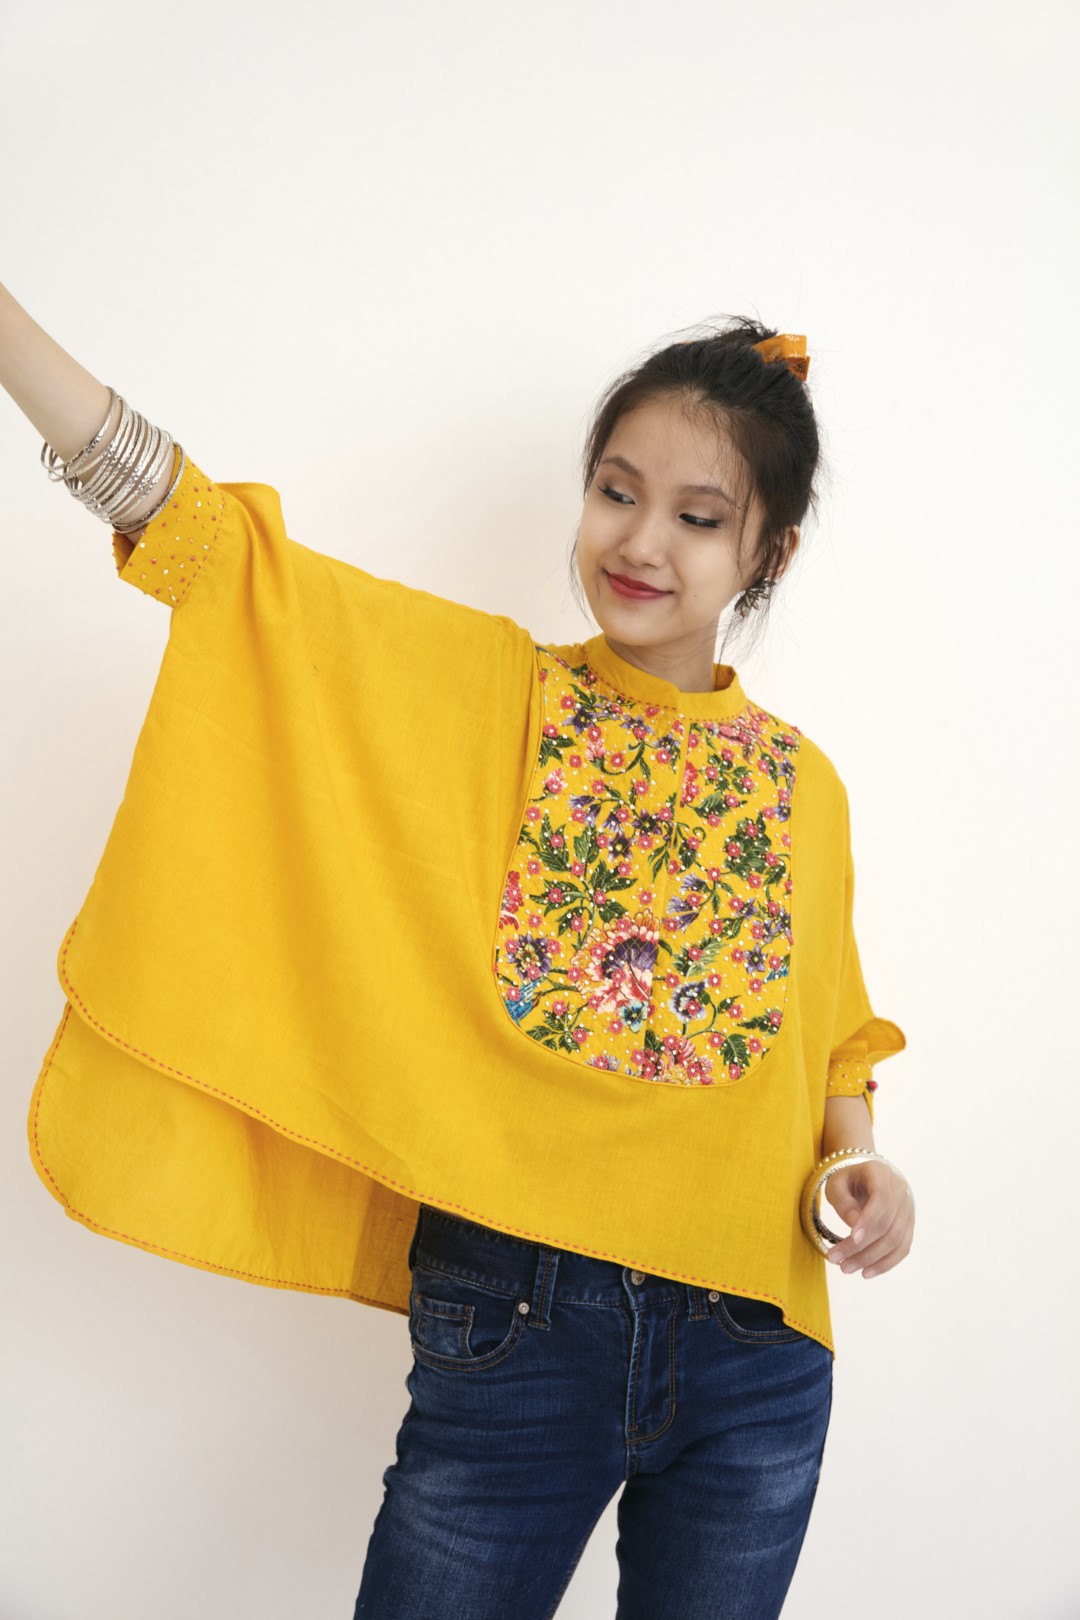 "Handwoven & hand-painted yellow chintz print with hand-embroidered along with beads, sequins & french knots. 100% Handwoven cotton; Lining: 100% cotton  100% Azo Free Dry Clean Only"